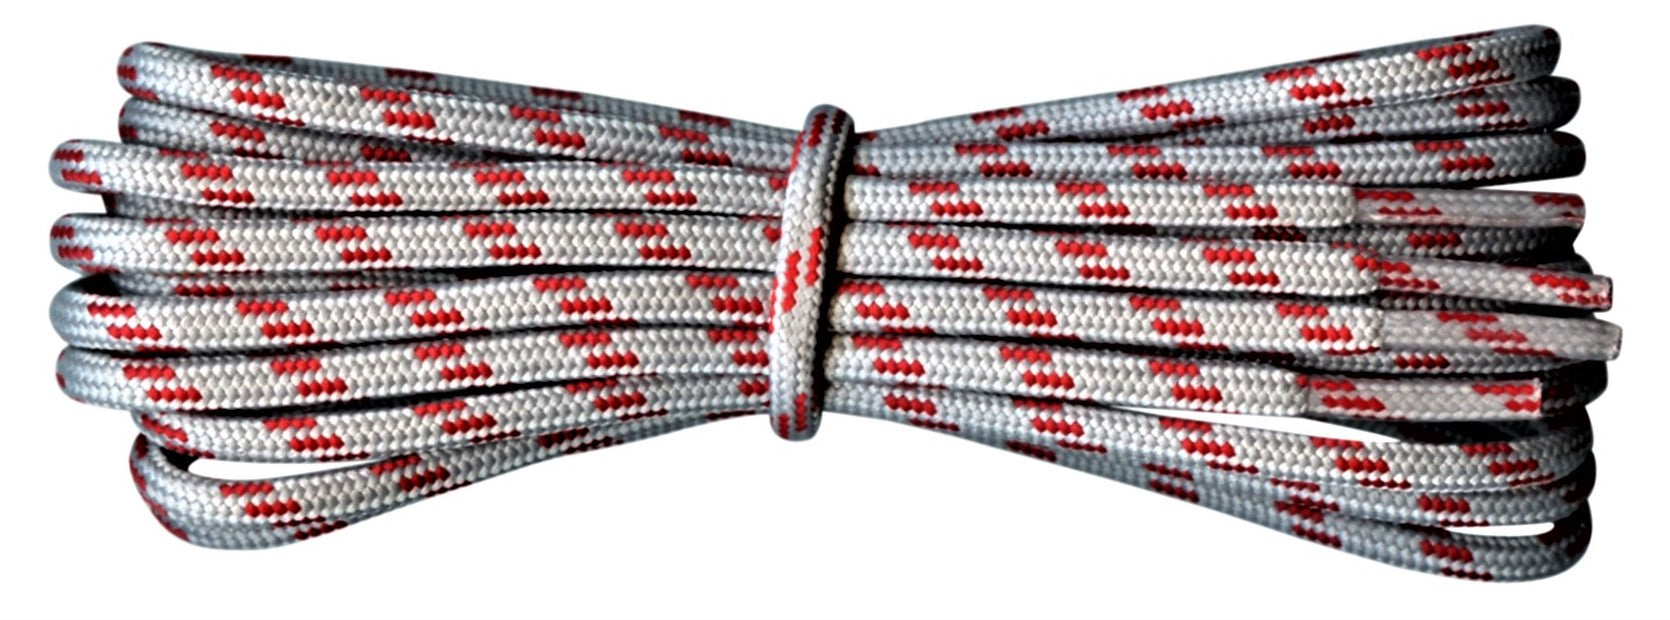 Strong Round Boot Laces Grey with Red flecks for hiking or walking  3.5 mm - fabmania shoe laces